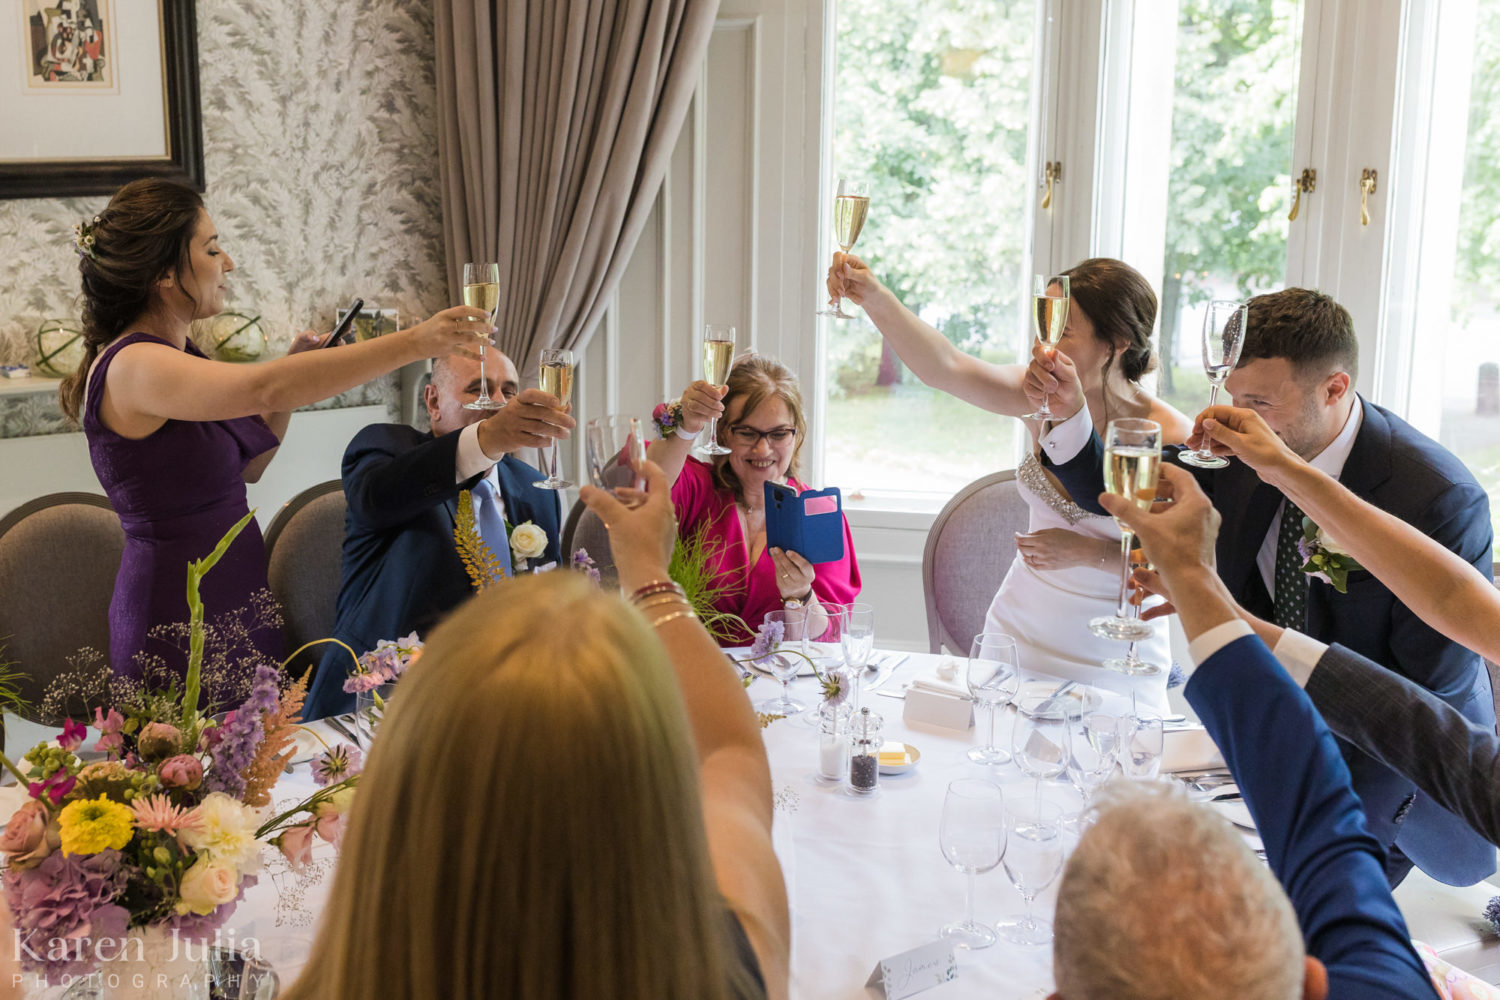 guests raise another toast to bride and groom